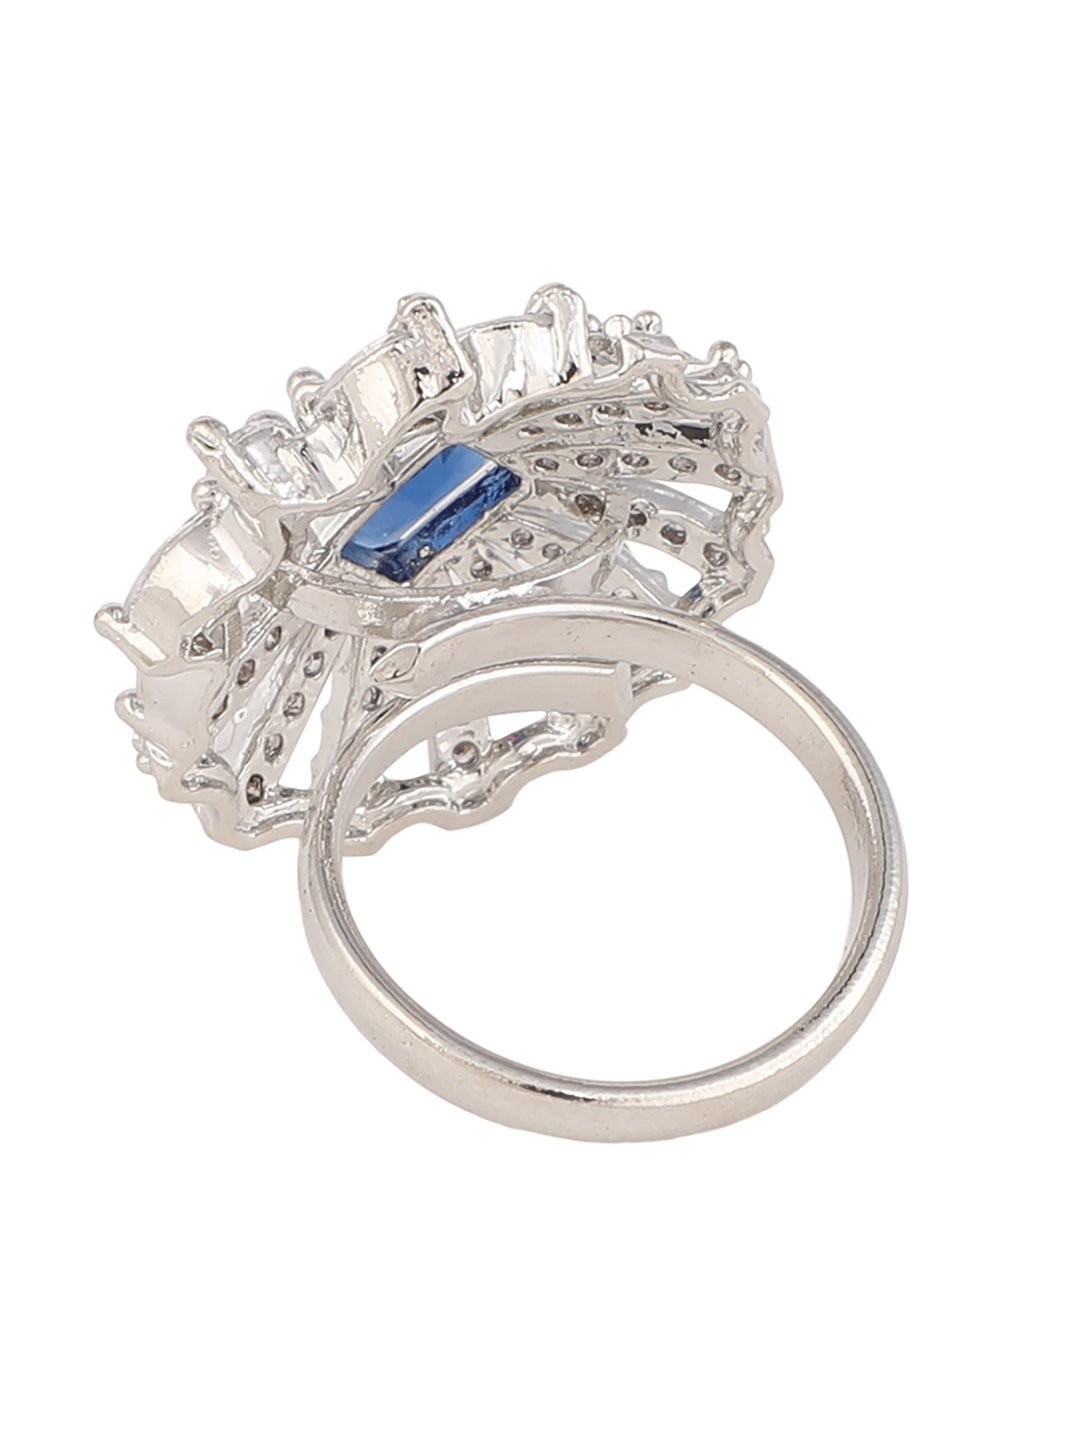 Women's Silver-Plated Blue & White Ad-Studded Hand Crafted Adjustable Finger Ring - Anikas Creation